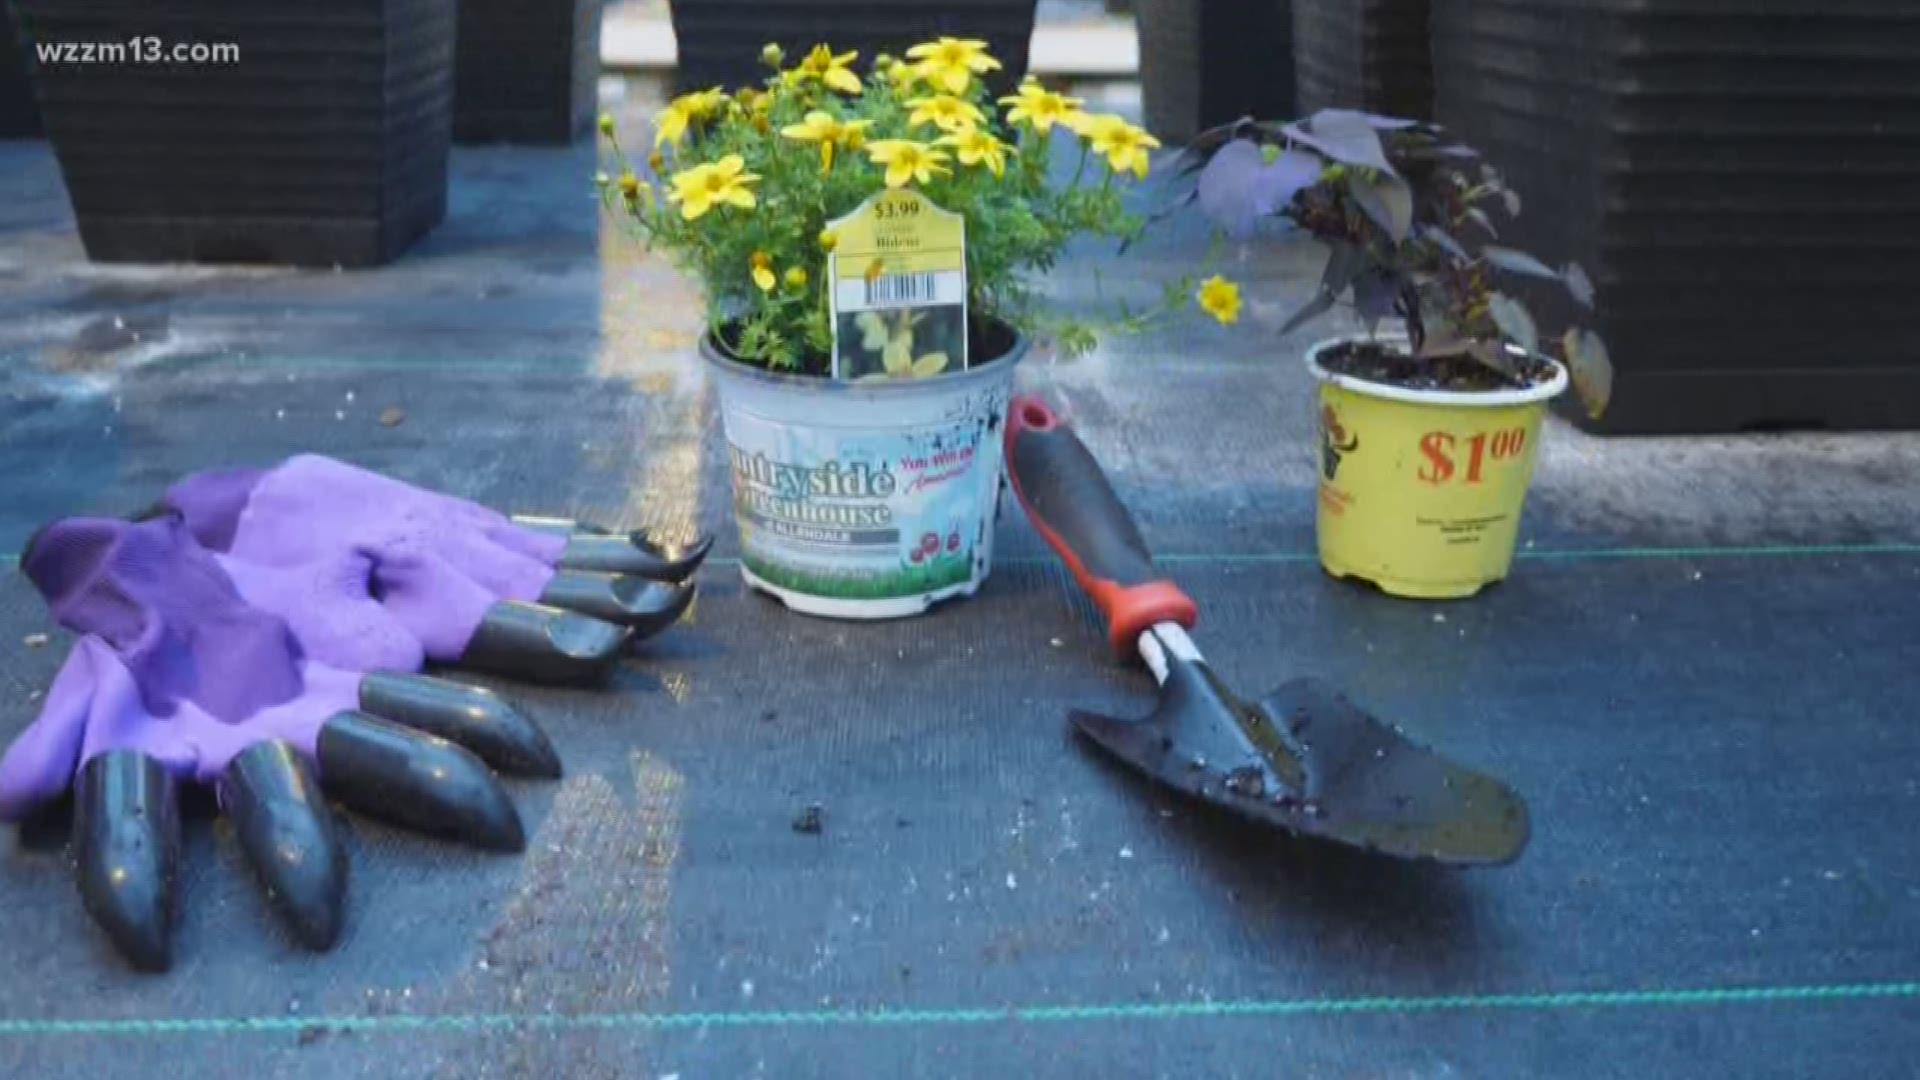 It's a combination of a glove and a shovel, and looks like something straight out of a Marvel movie. These "Garden Genie Gloves" aim to make it easier to dig in the garden. We put them to the test in this edition of "Try It Before You Buy It."